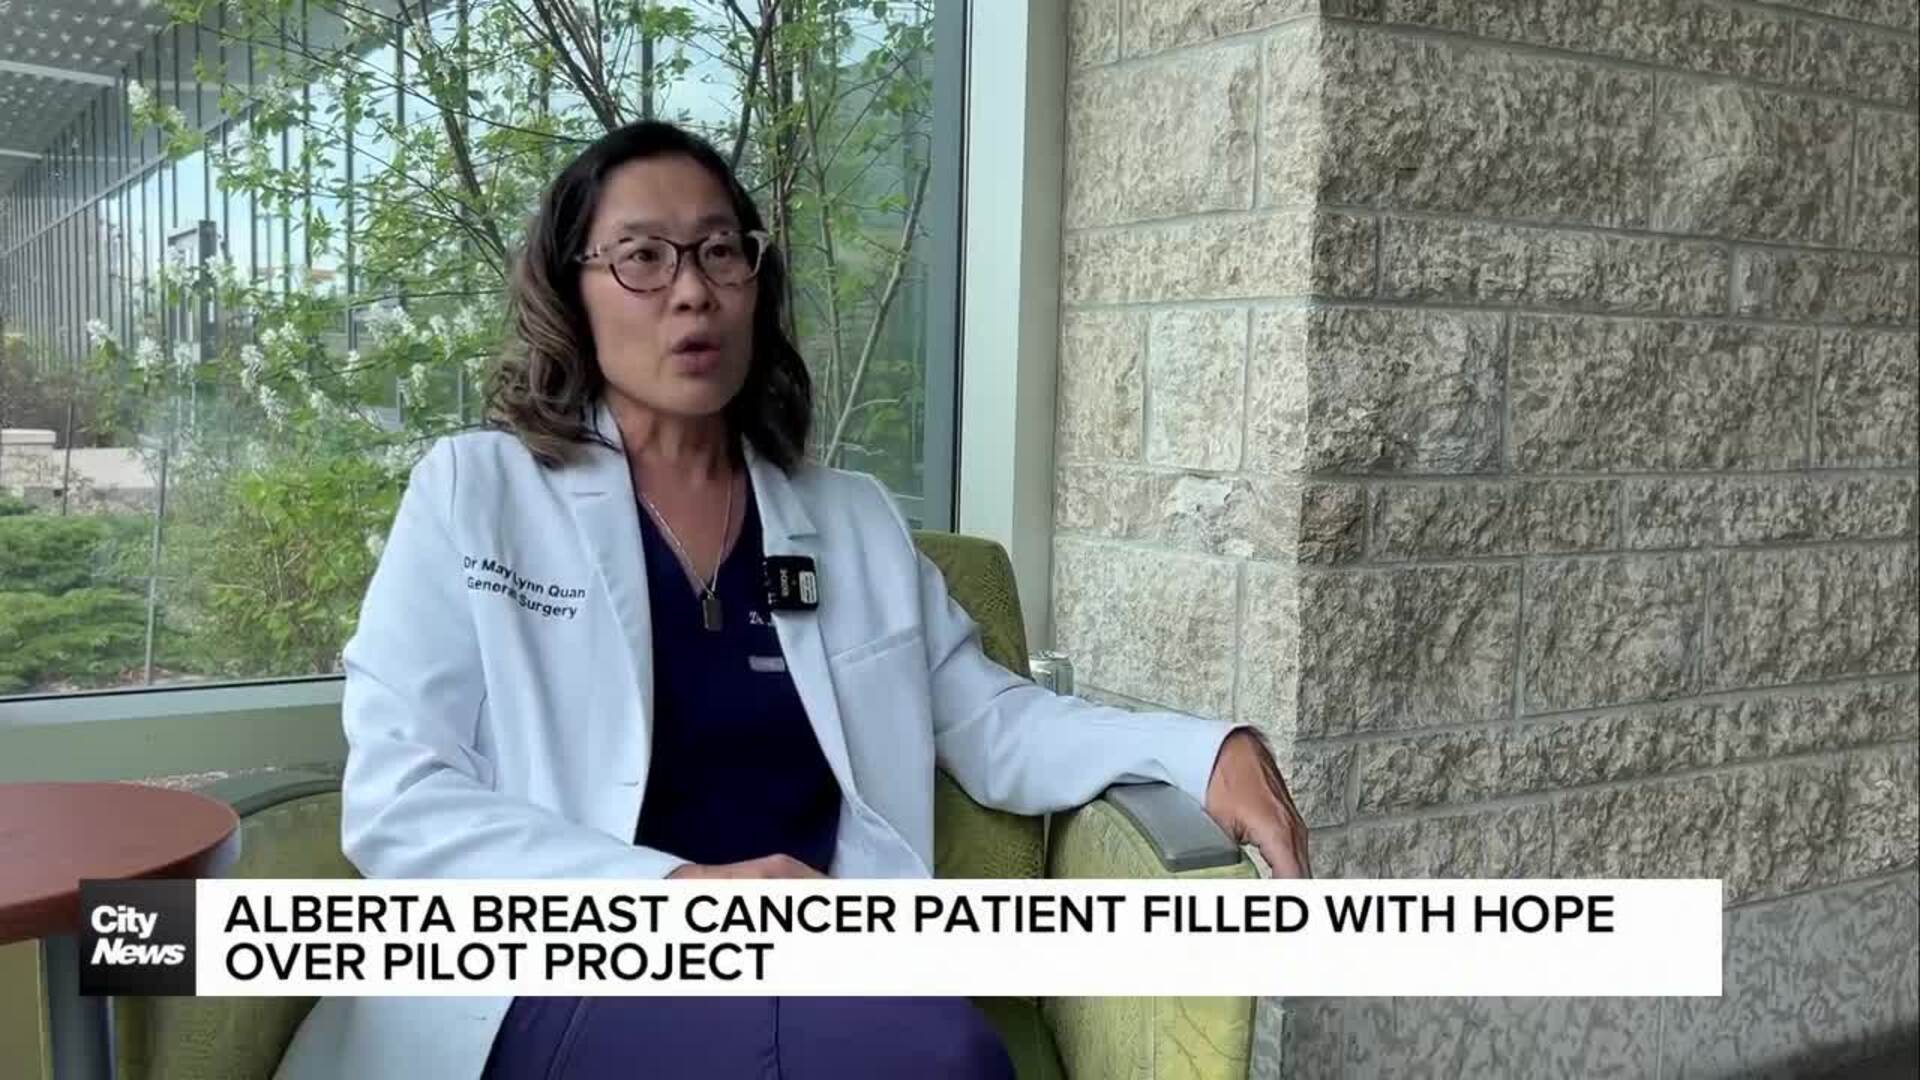 Alberta breast cancer patient filled with hope over pilot project